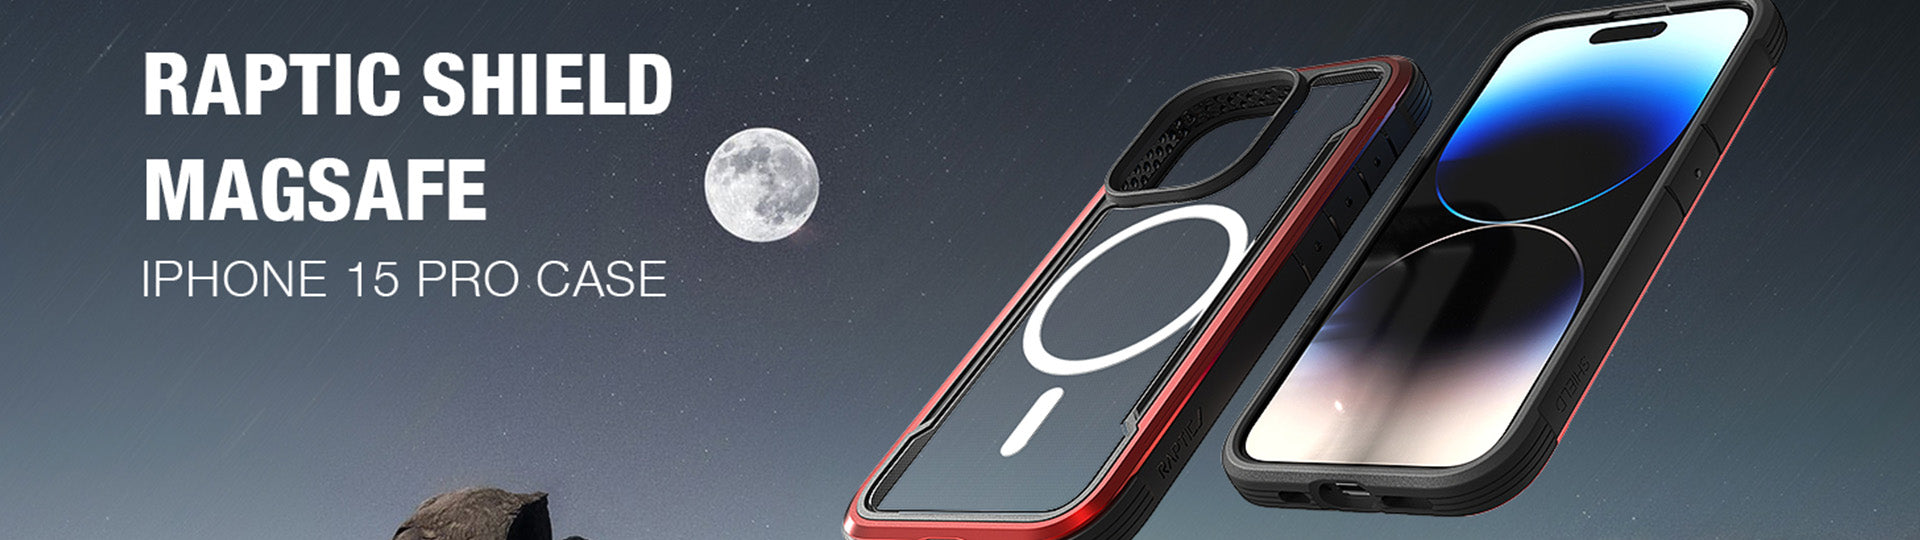 Protective magsafe case for iphone 15 pro featured in a space-themed advertisement.